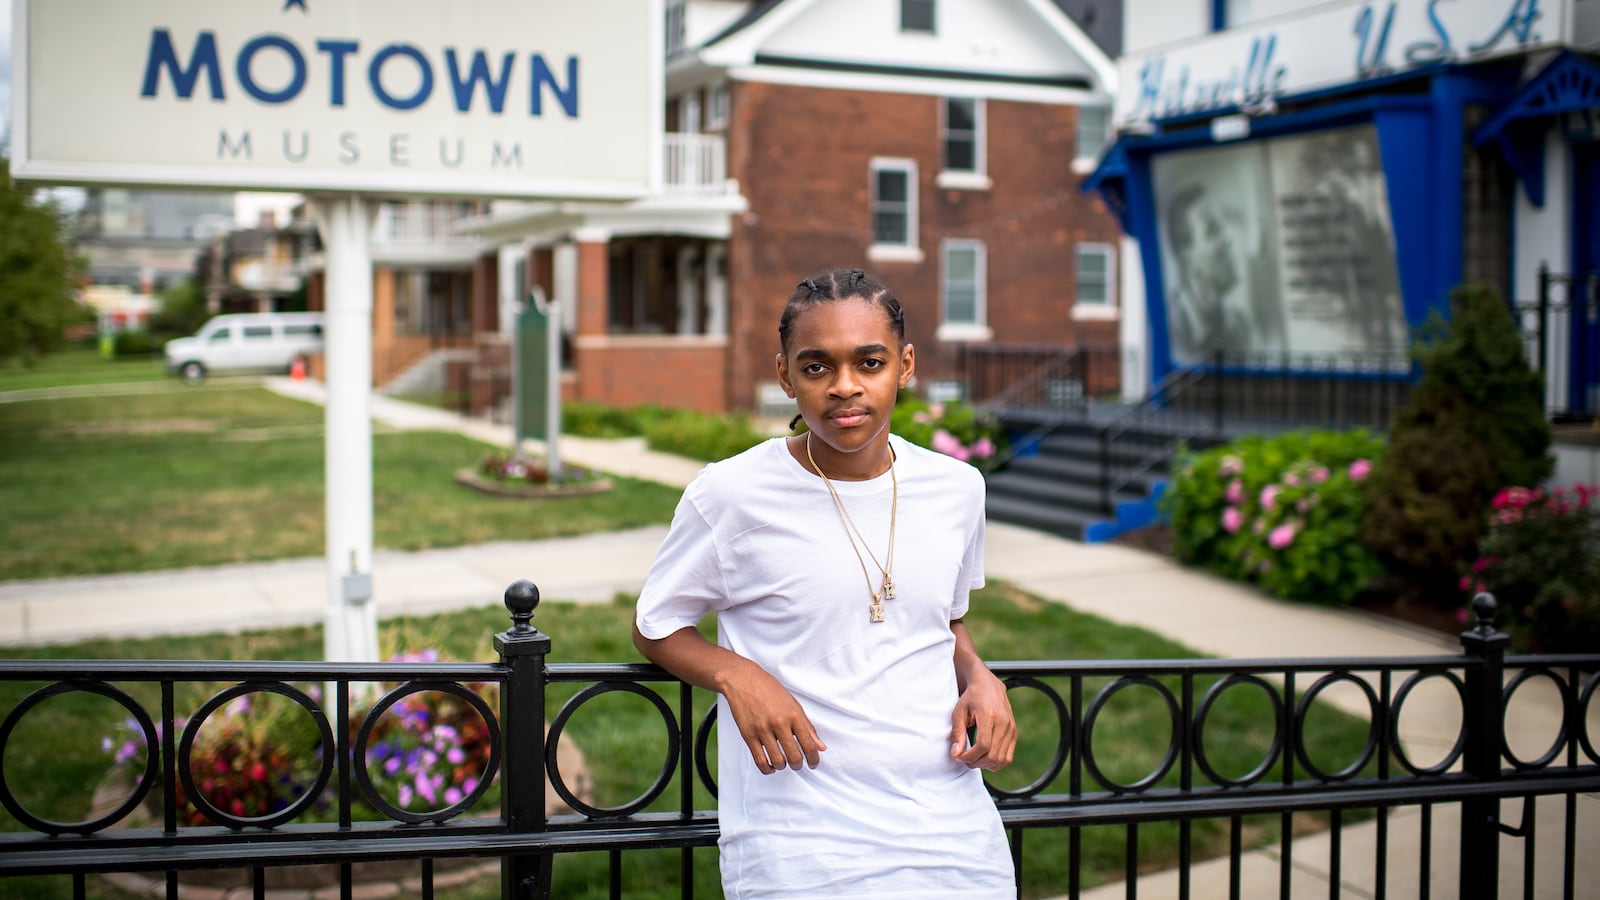 King Bethel, wearing a white shirt and gold necklaces, leans against a railing outside of Detroit’s Motown Museum.